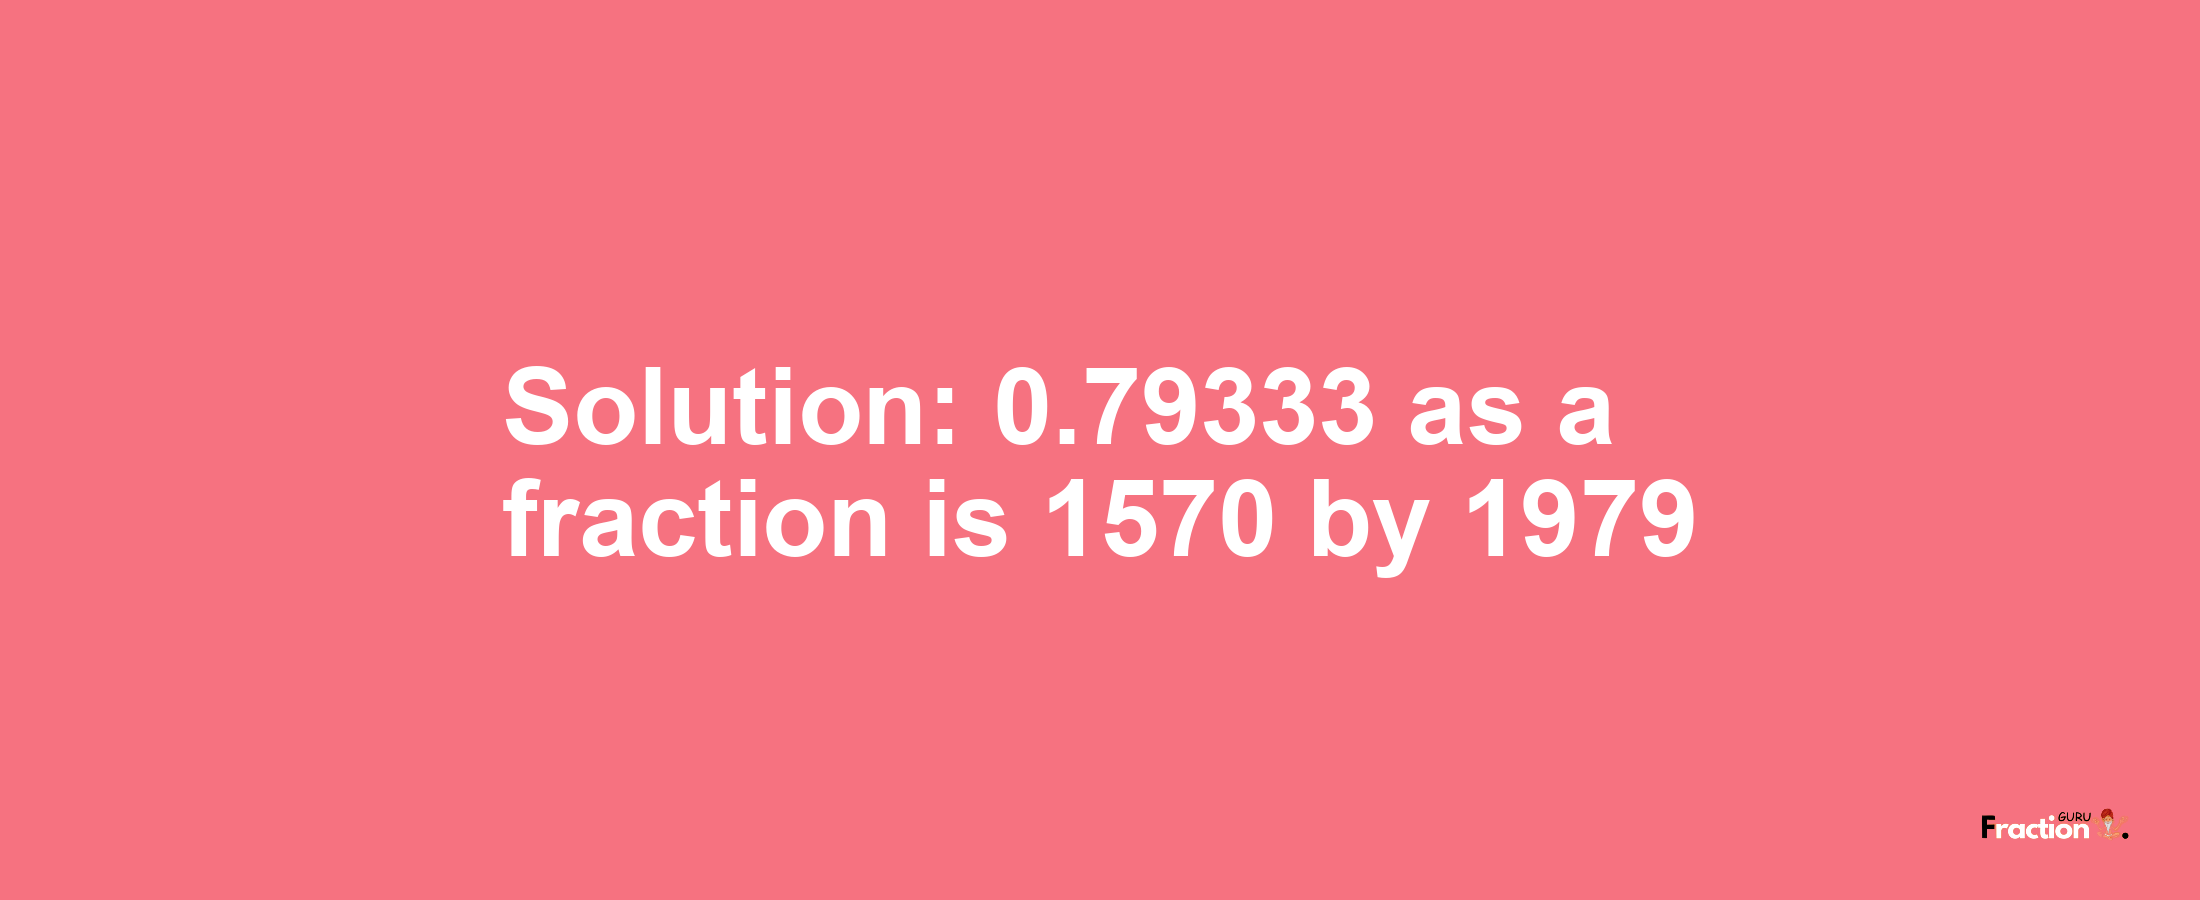 Solution:0.79333 as a fraction is 1570/1979